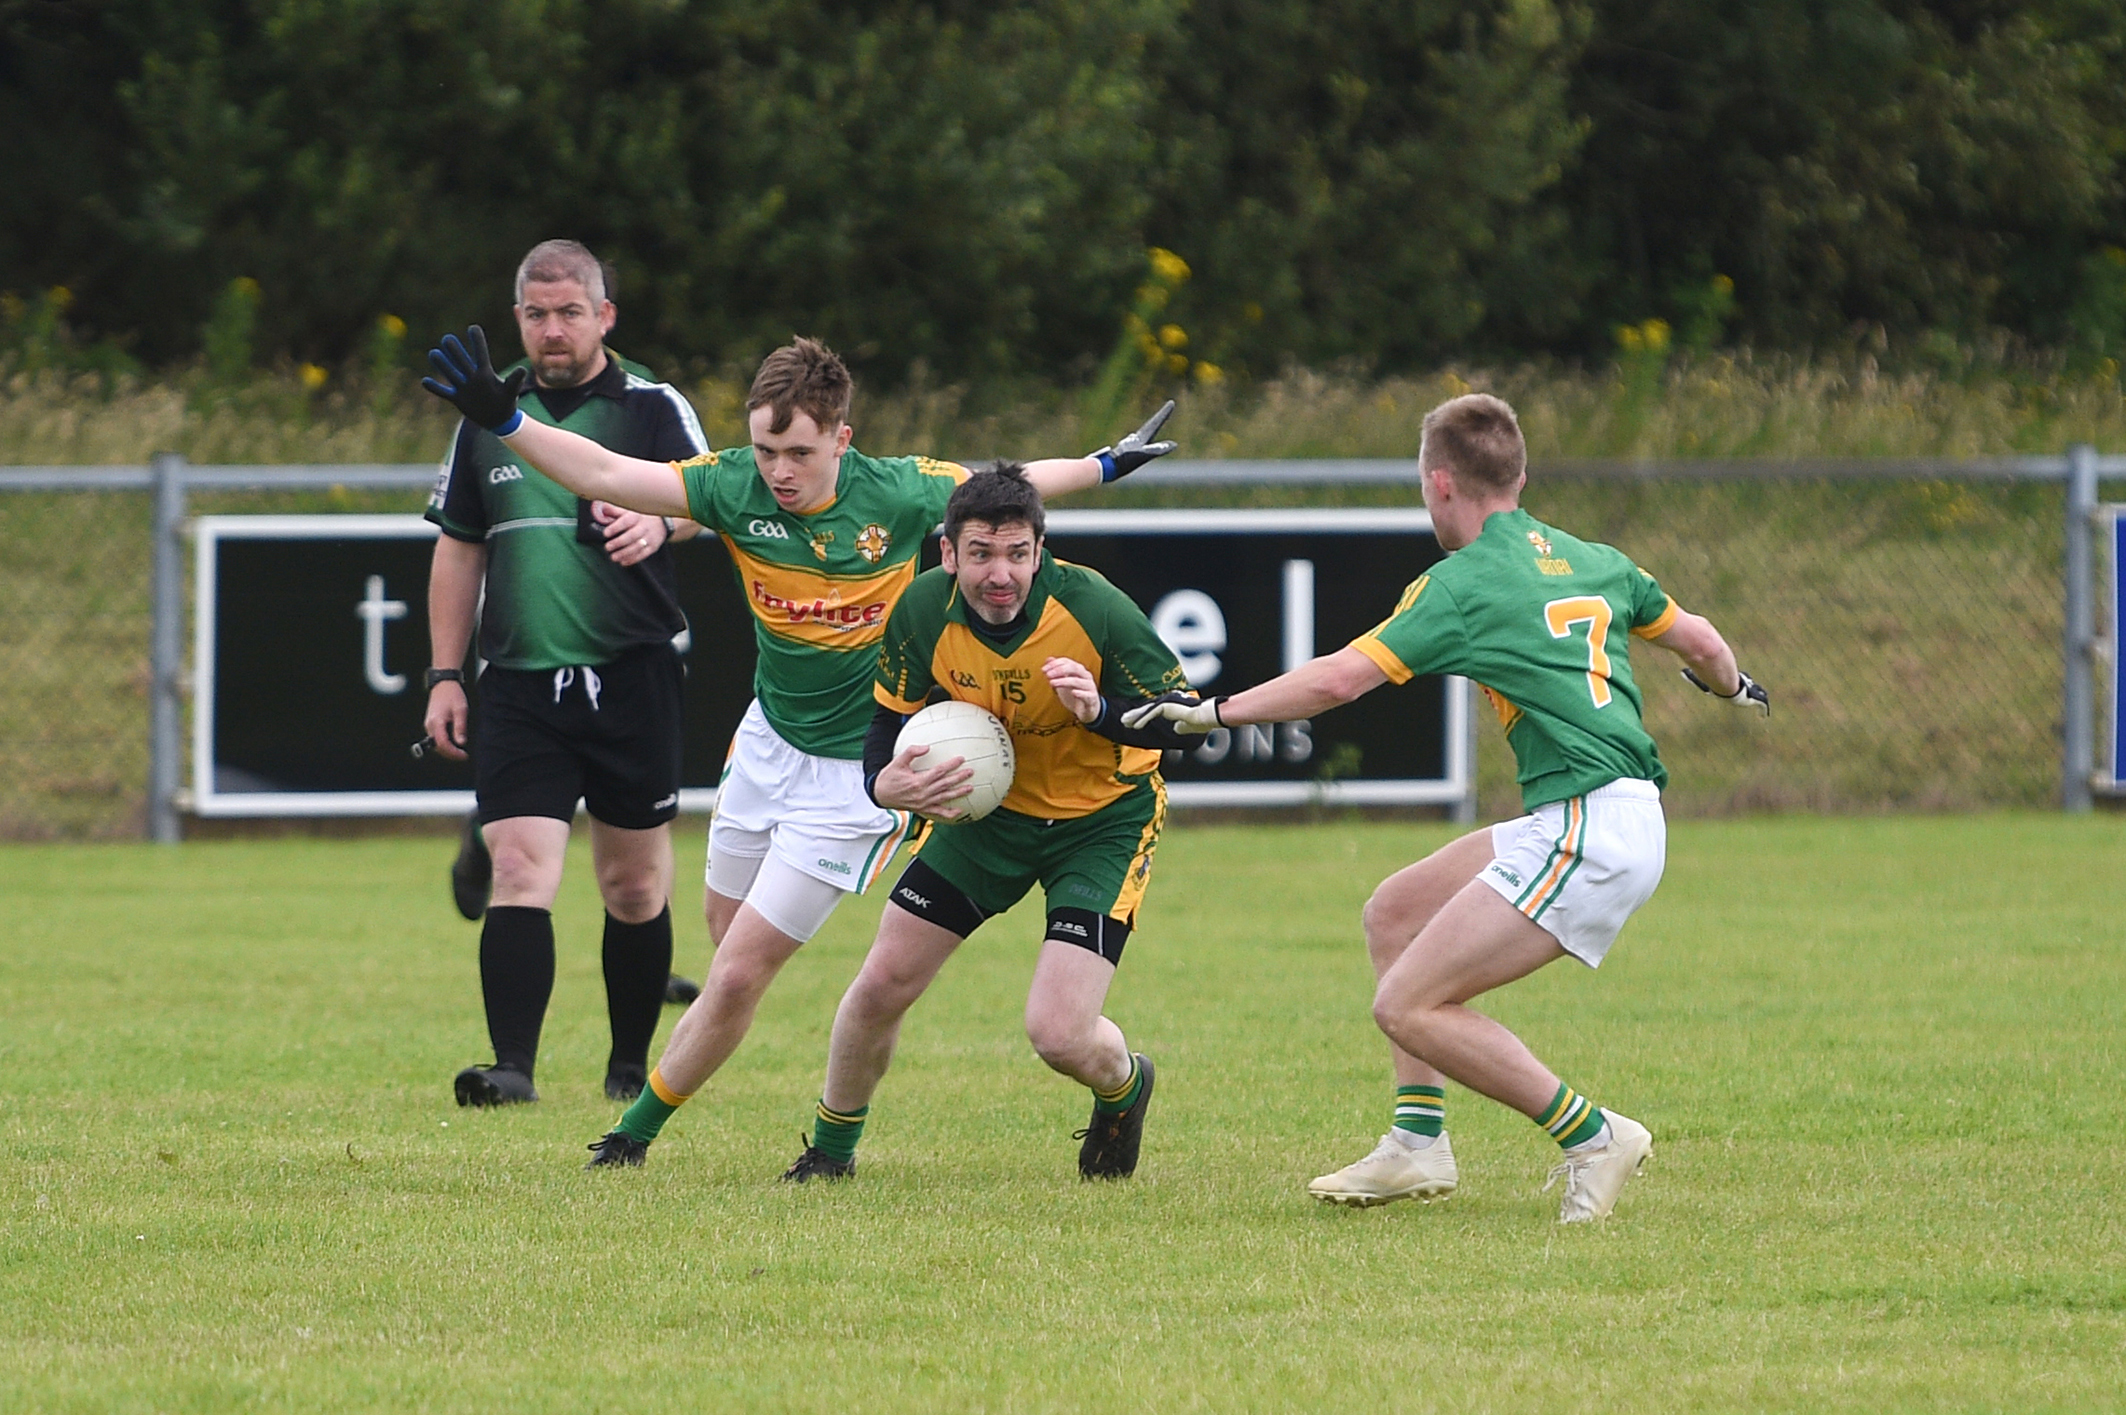 Mixed fortunes in ACL for local sides